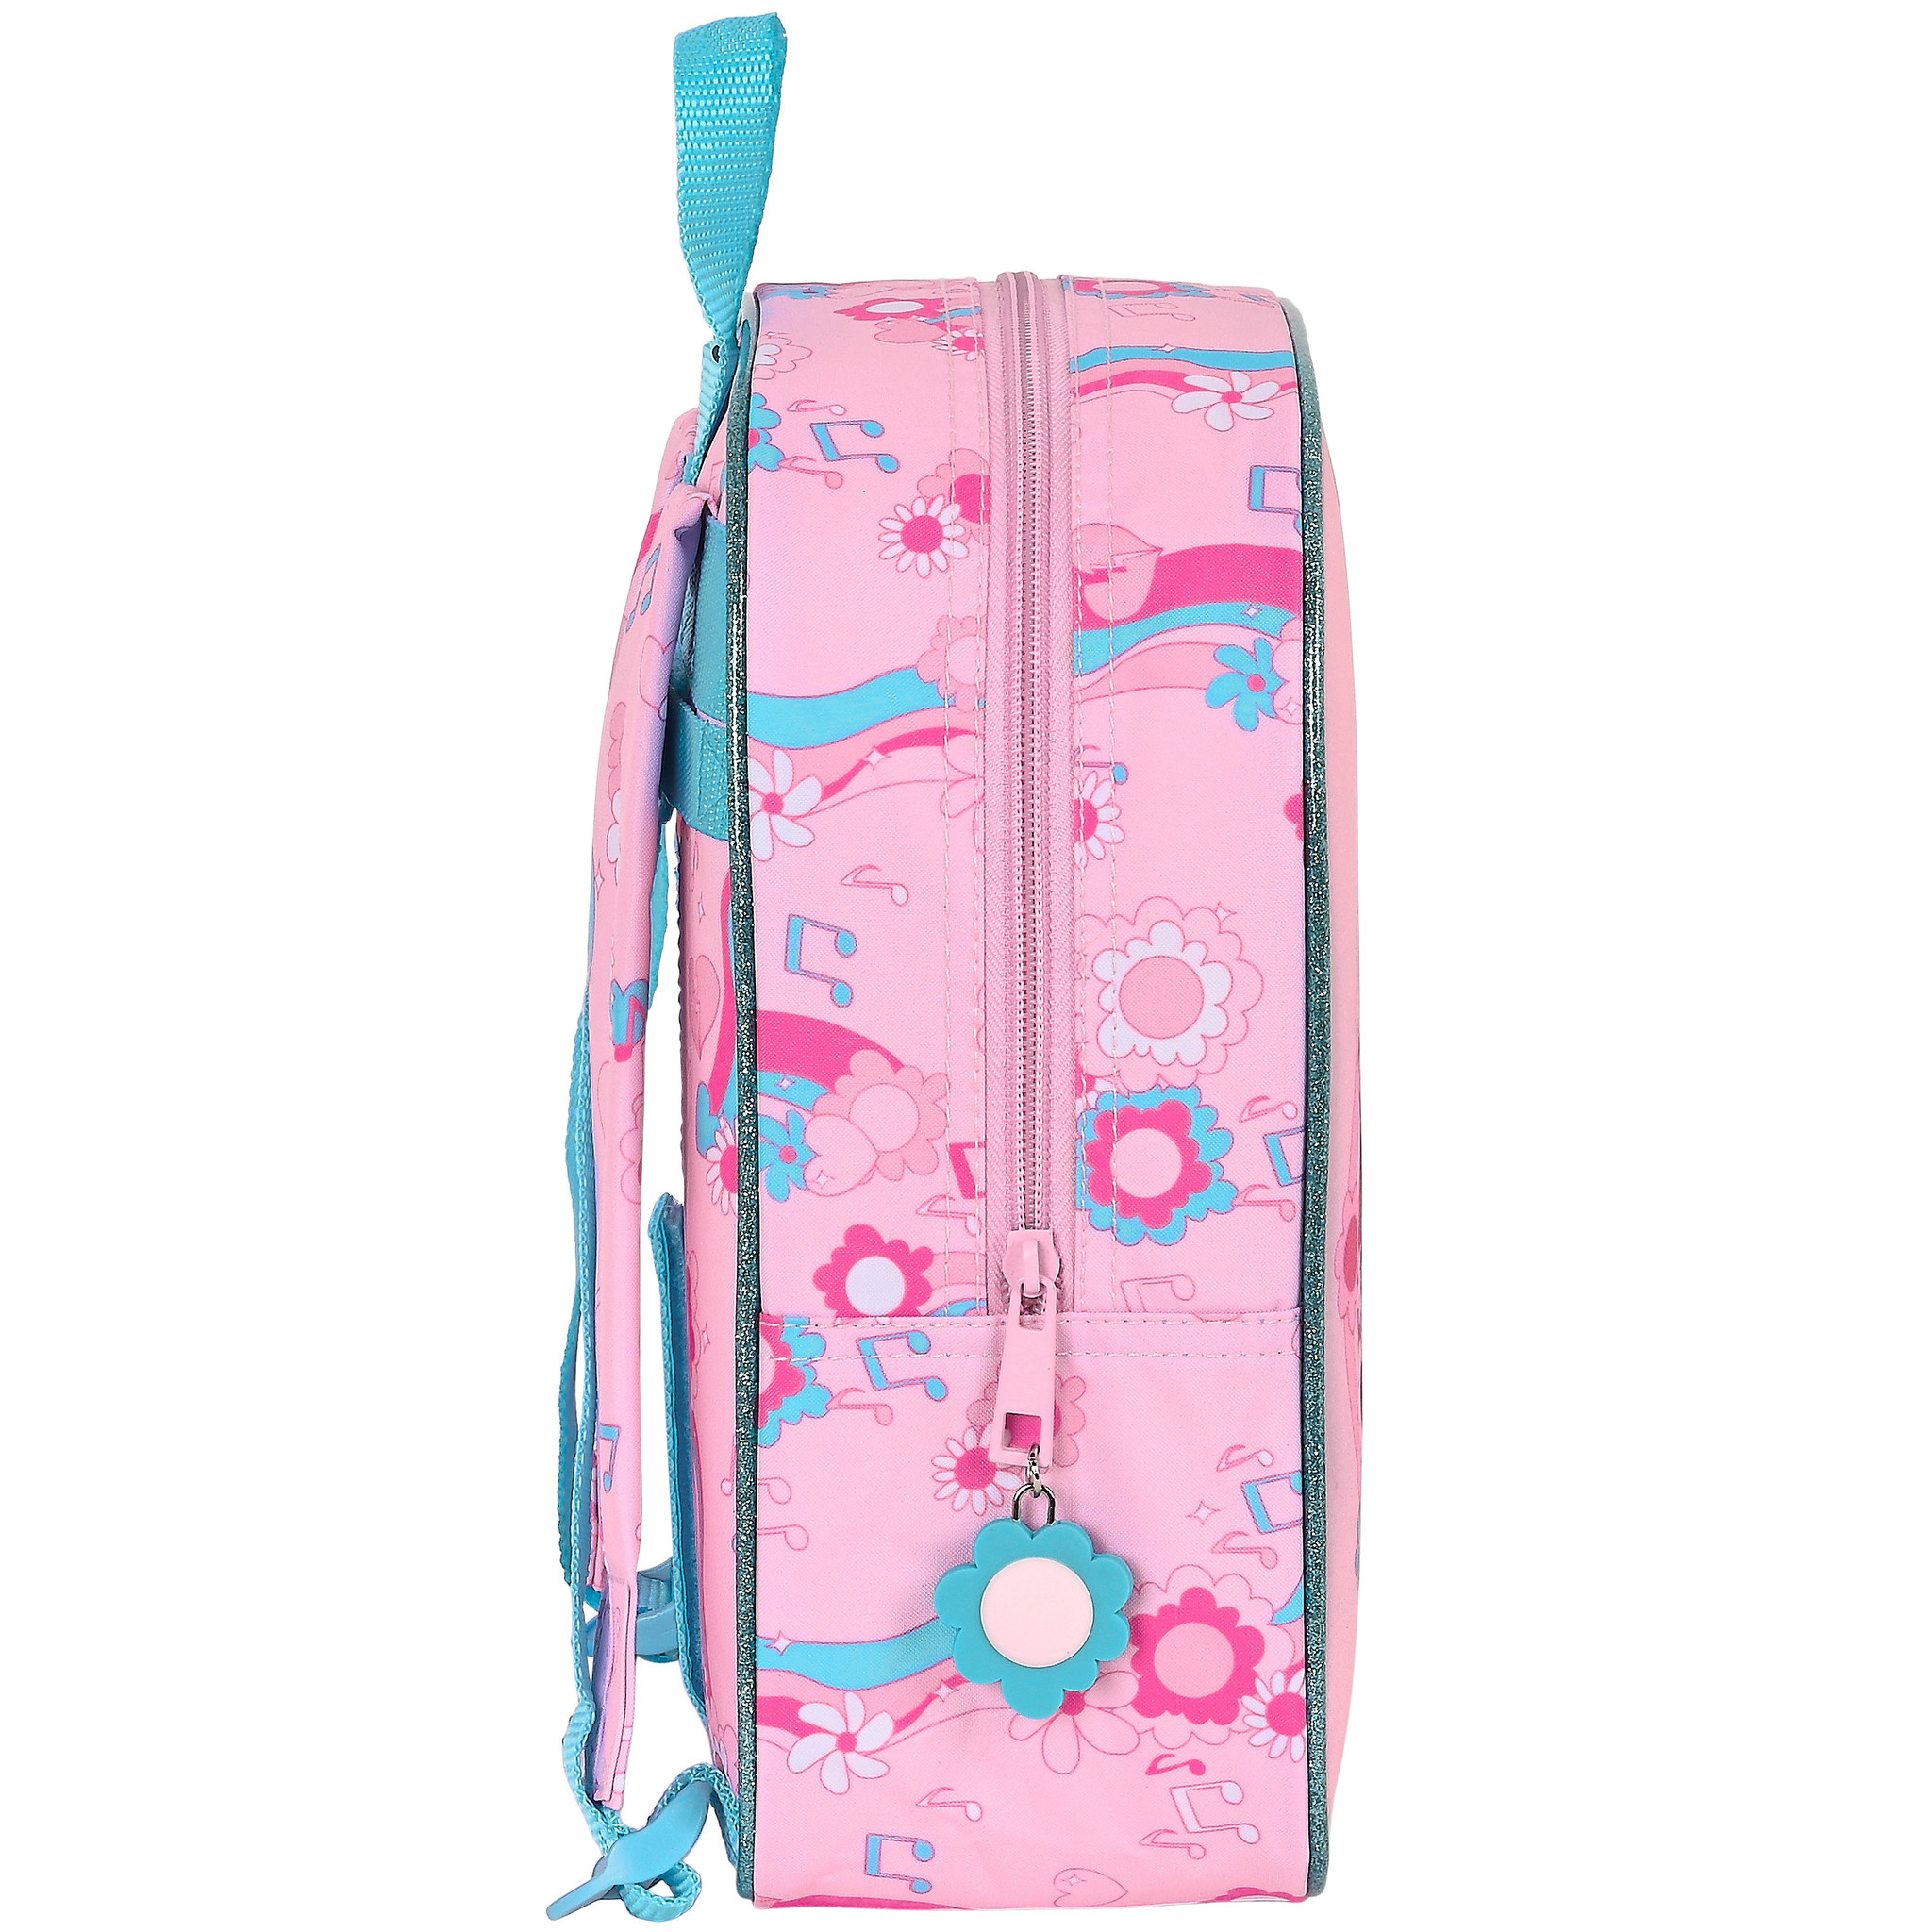 L.O.L. Surprise Toddler backpack, Glow Girls - 27 x 22 x 10 cm - Polyester